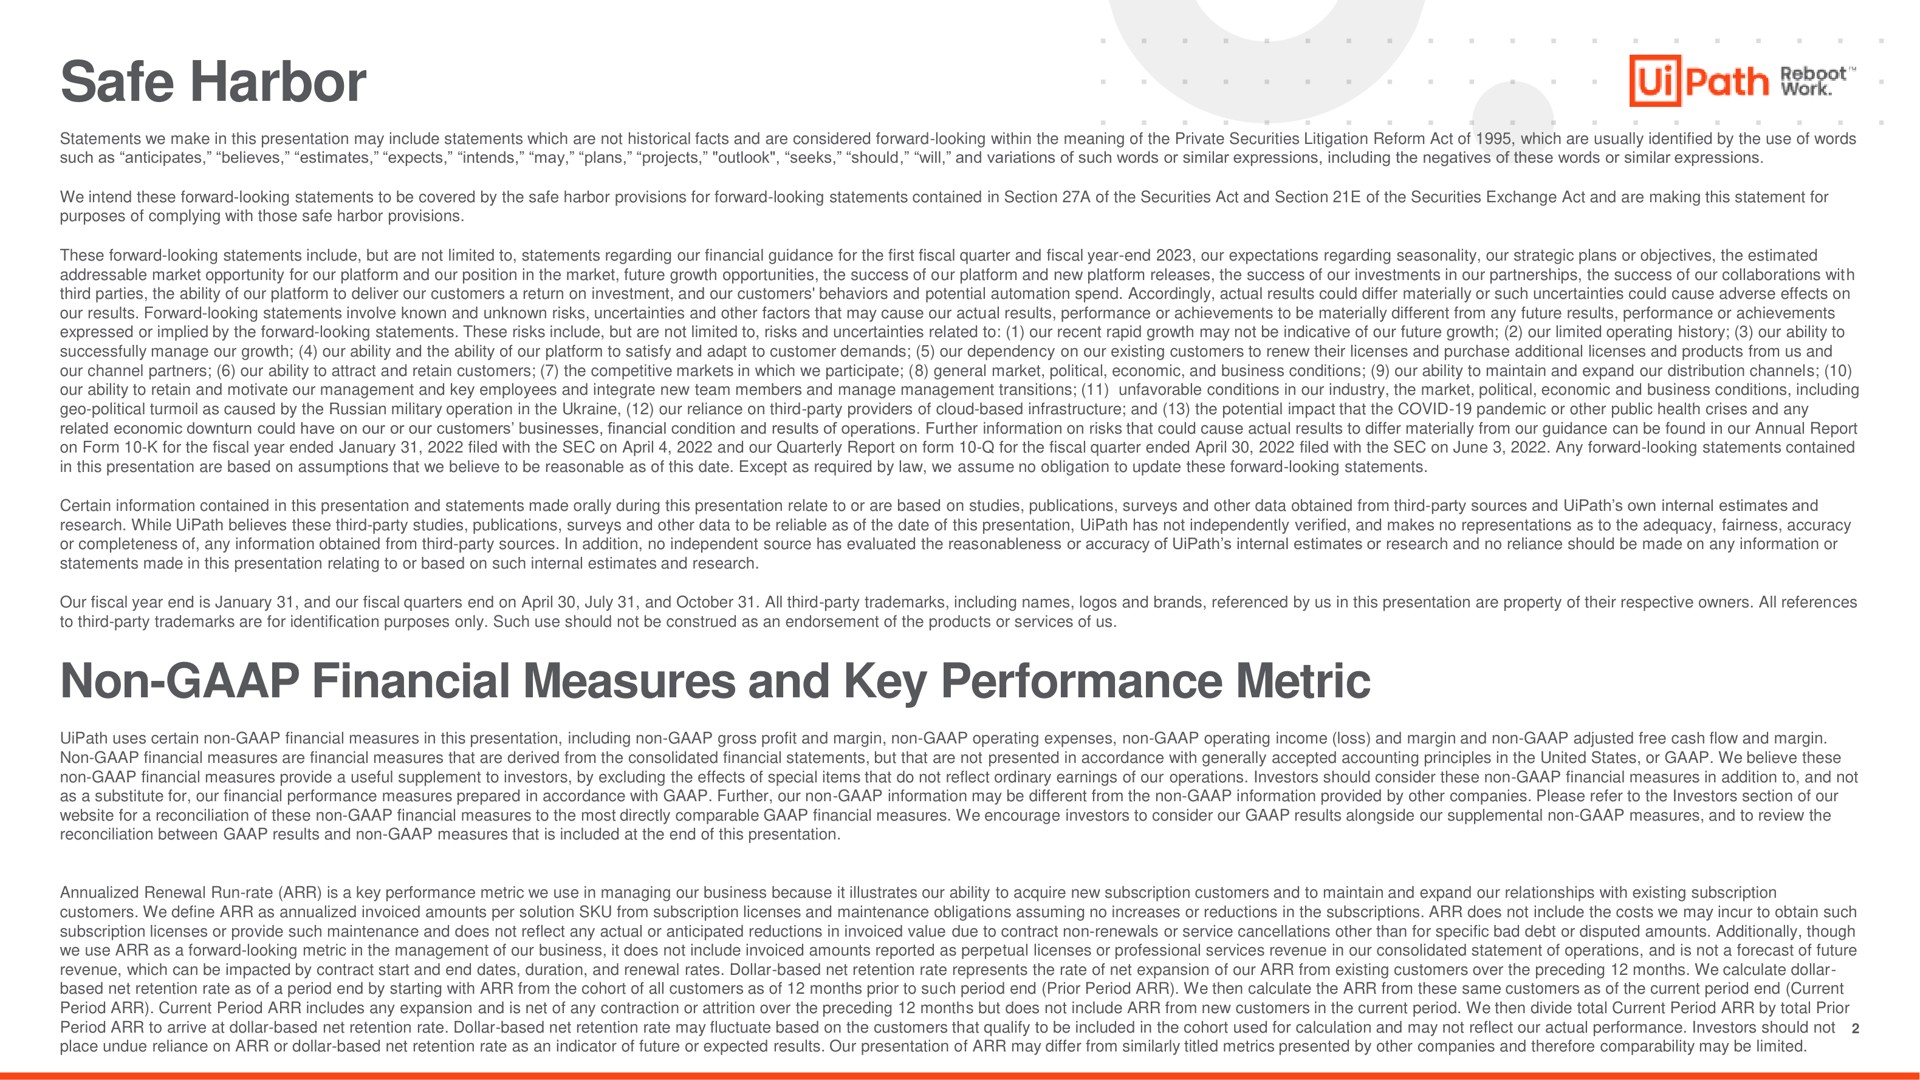 safe harbor non financial measures and key performance metric path wer | UiPath